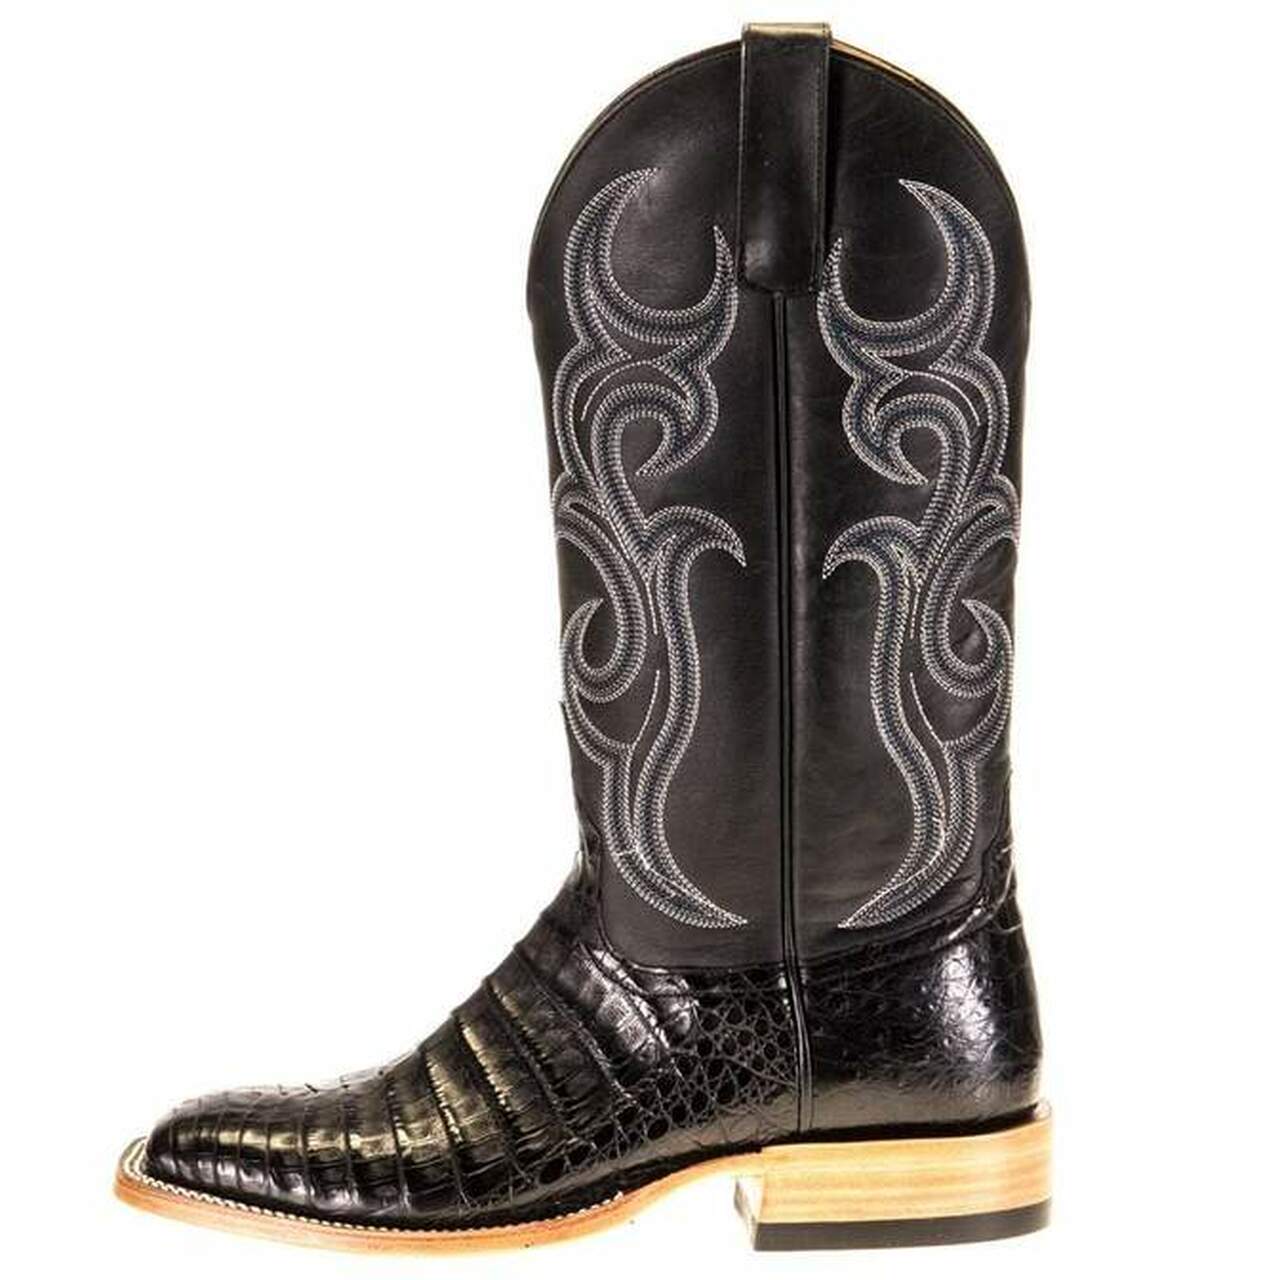 MEN'S HORSE POWER BY ANDERSON BEAN WESTERN EXOTIC BOOTS HP8002 CAIMAN